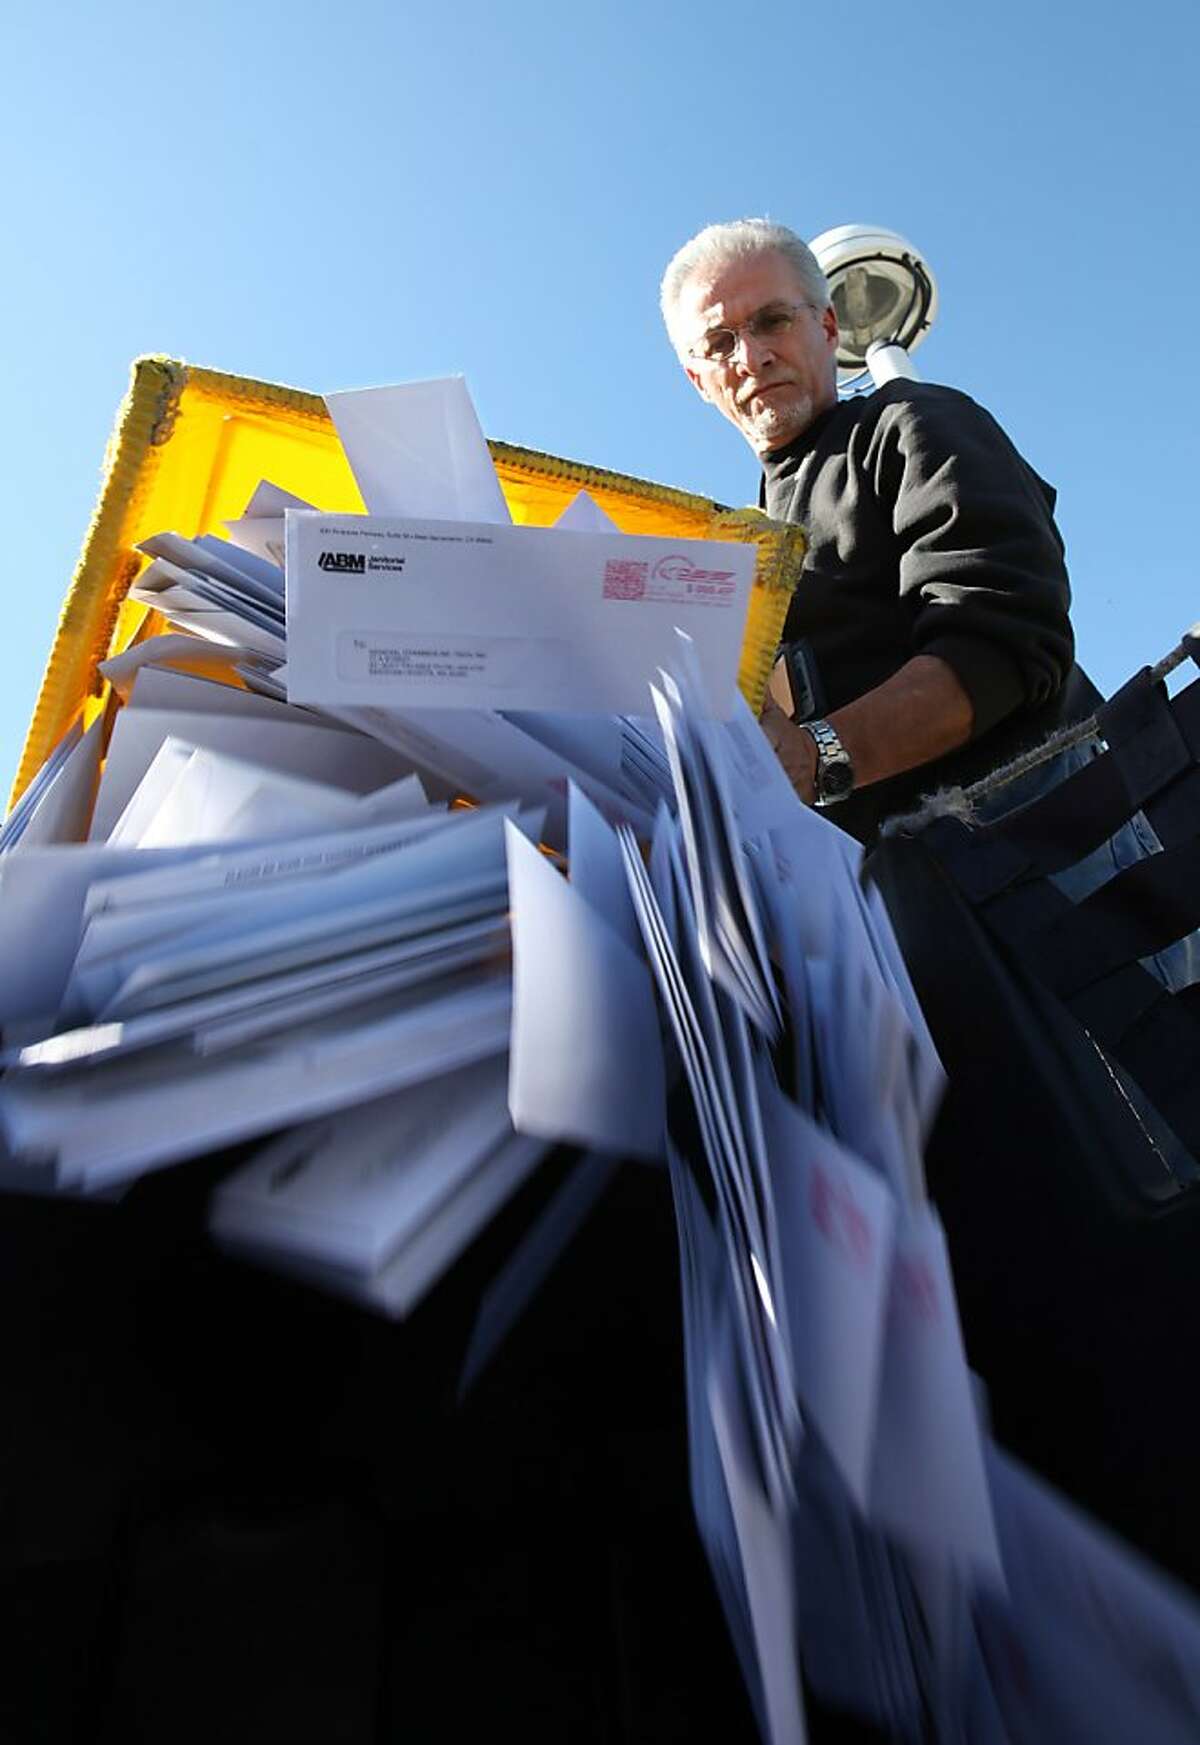 In this photo taken Feb. 24, 2012, mail deposited into outdoor postal boxes is collected for processing by postal worker Francisco Engelhard at the Sacramento Processing Center in West Sacramento, Calif. Elections officials in several states are concerned that the closing of mail-processing centers and post offices could disrupt vote-by-mail balloting this year.(AP Photo/Rich Pedroncelli)